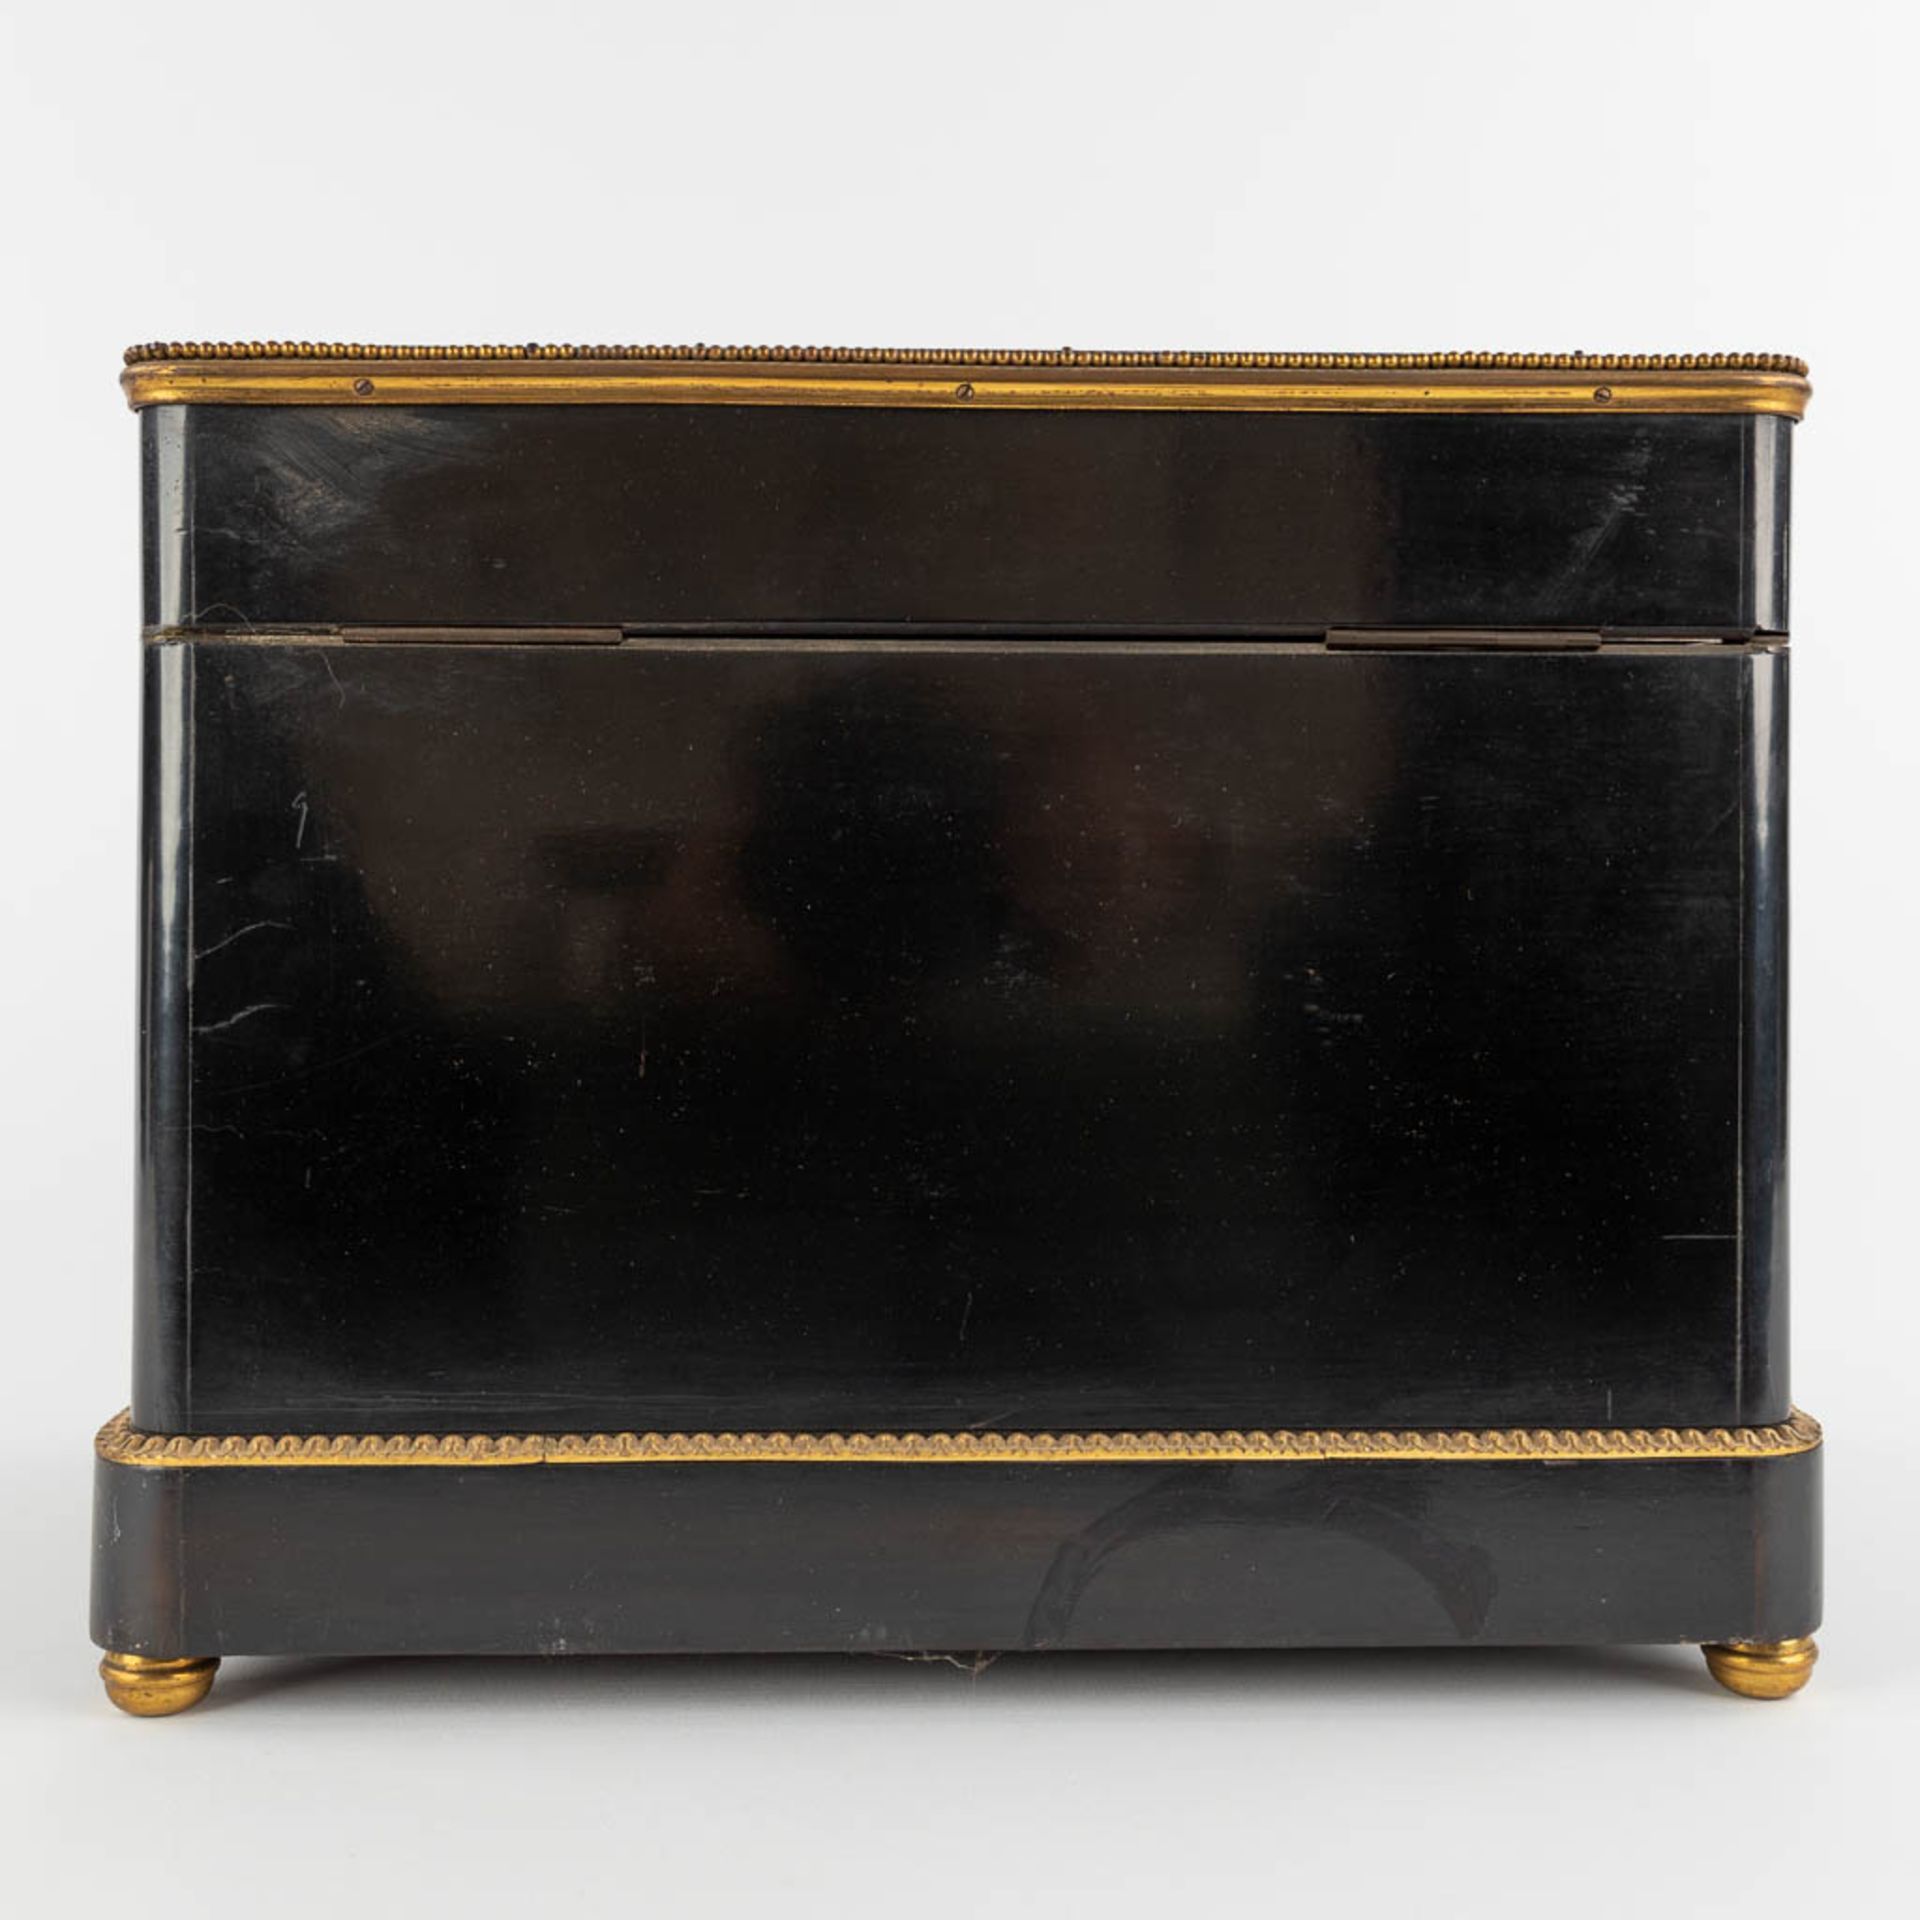 An antique Cave-à-liqueur, liquor box, ebonised wood inlaid with mother of pearl and copper. 19th C. - Image 6 of 16